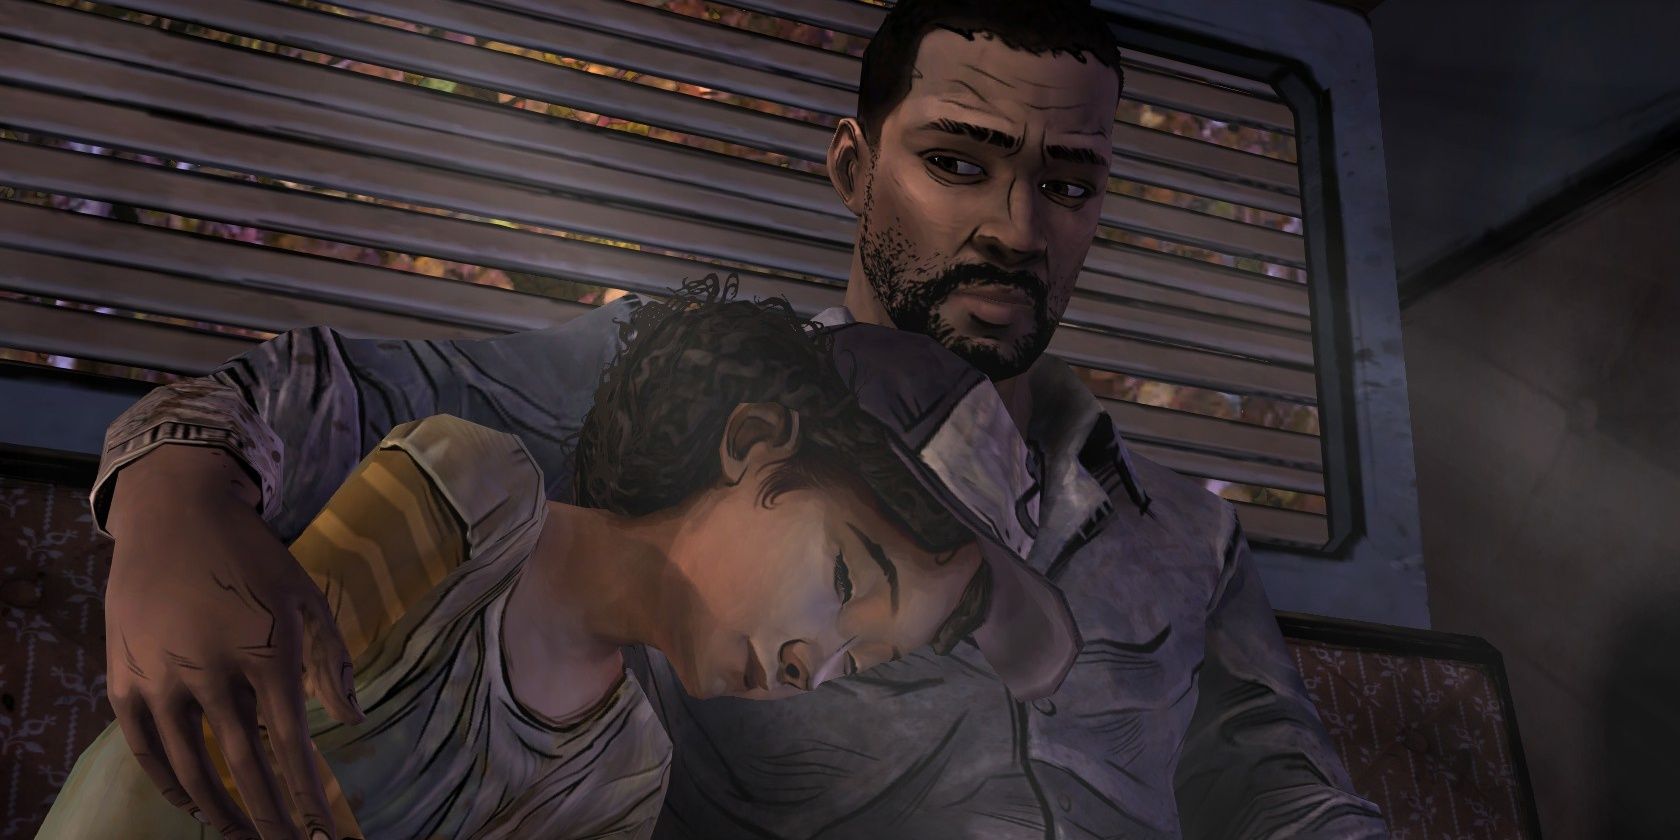 Lee and Clementine in The Walking Dead